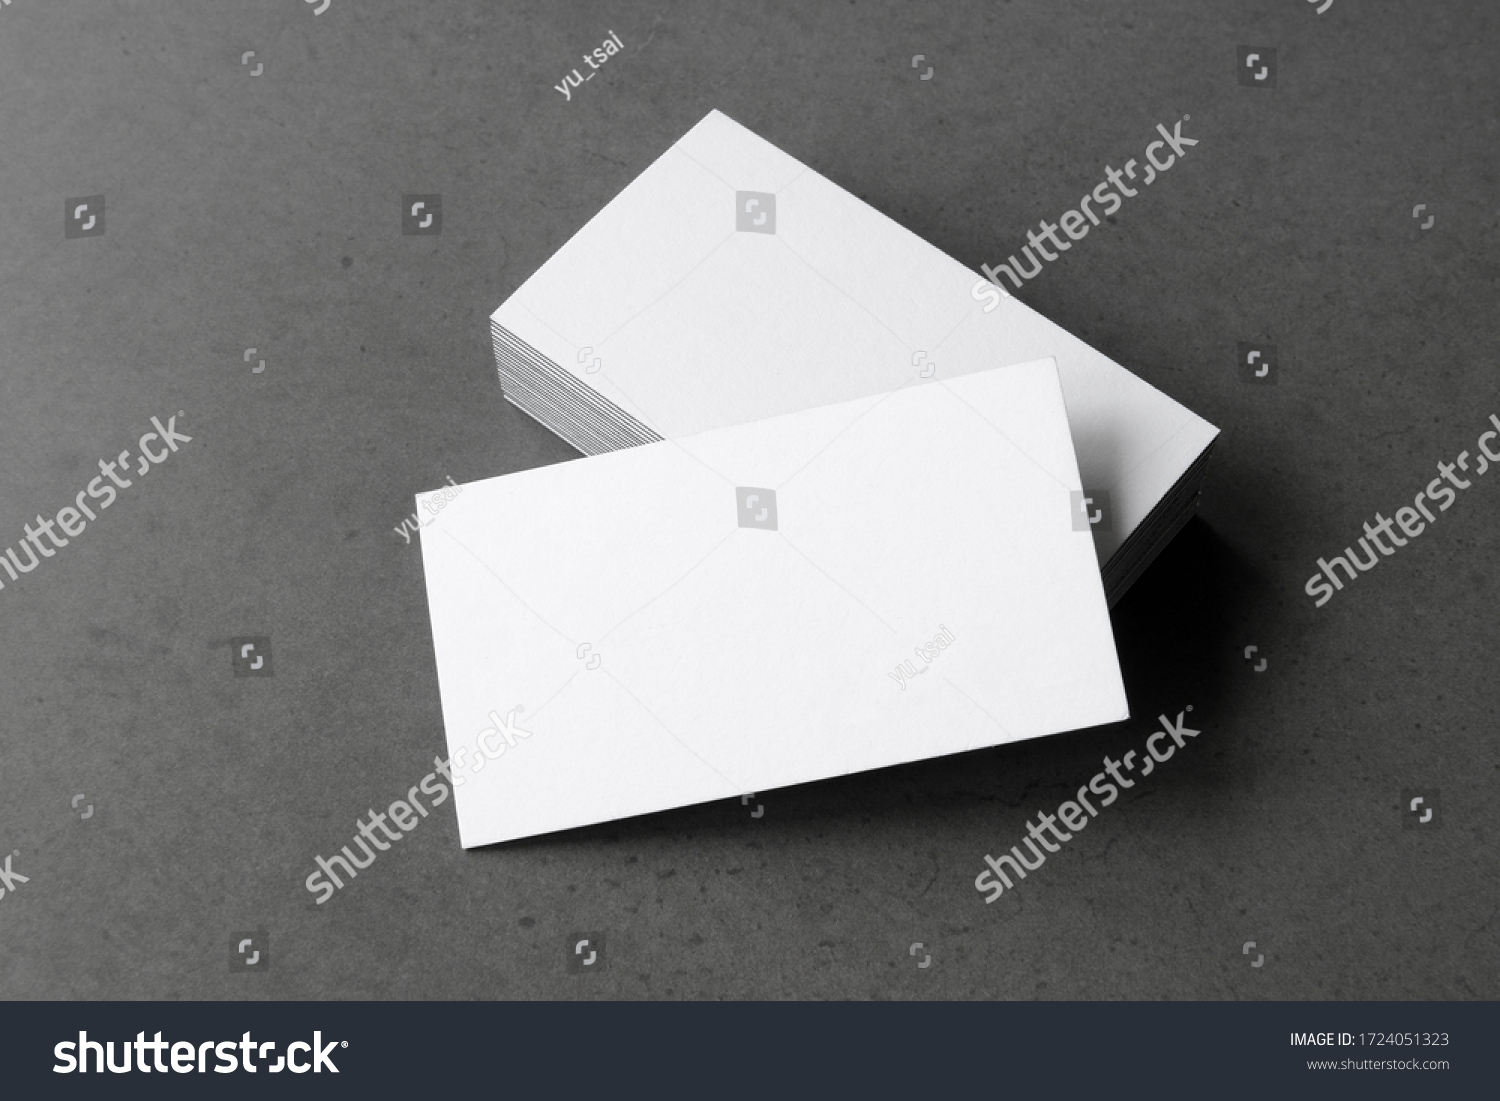 Business cards blank. Mockup on black background.  Copy space for text. #1724051323